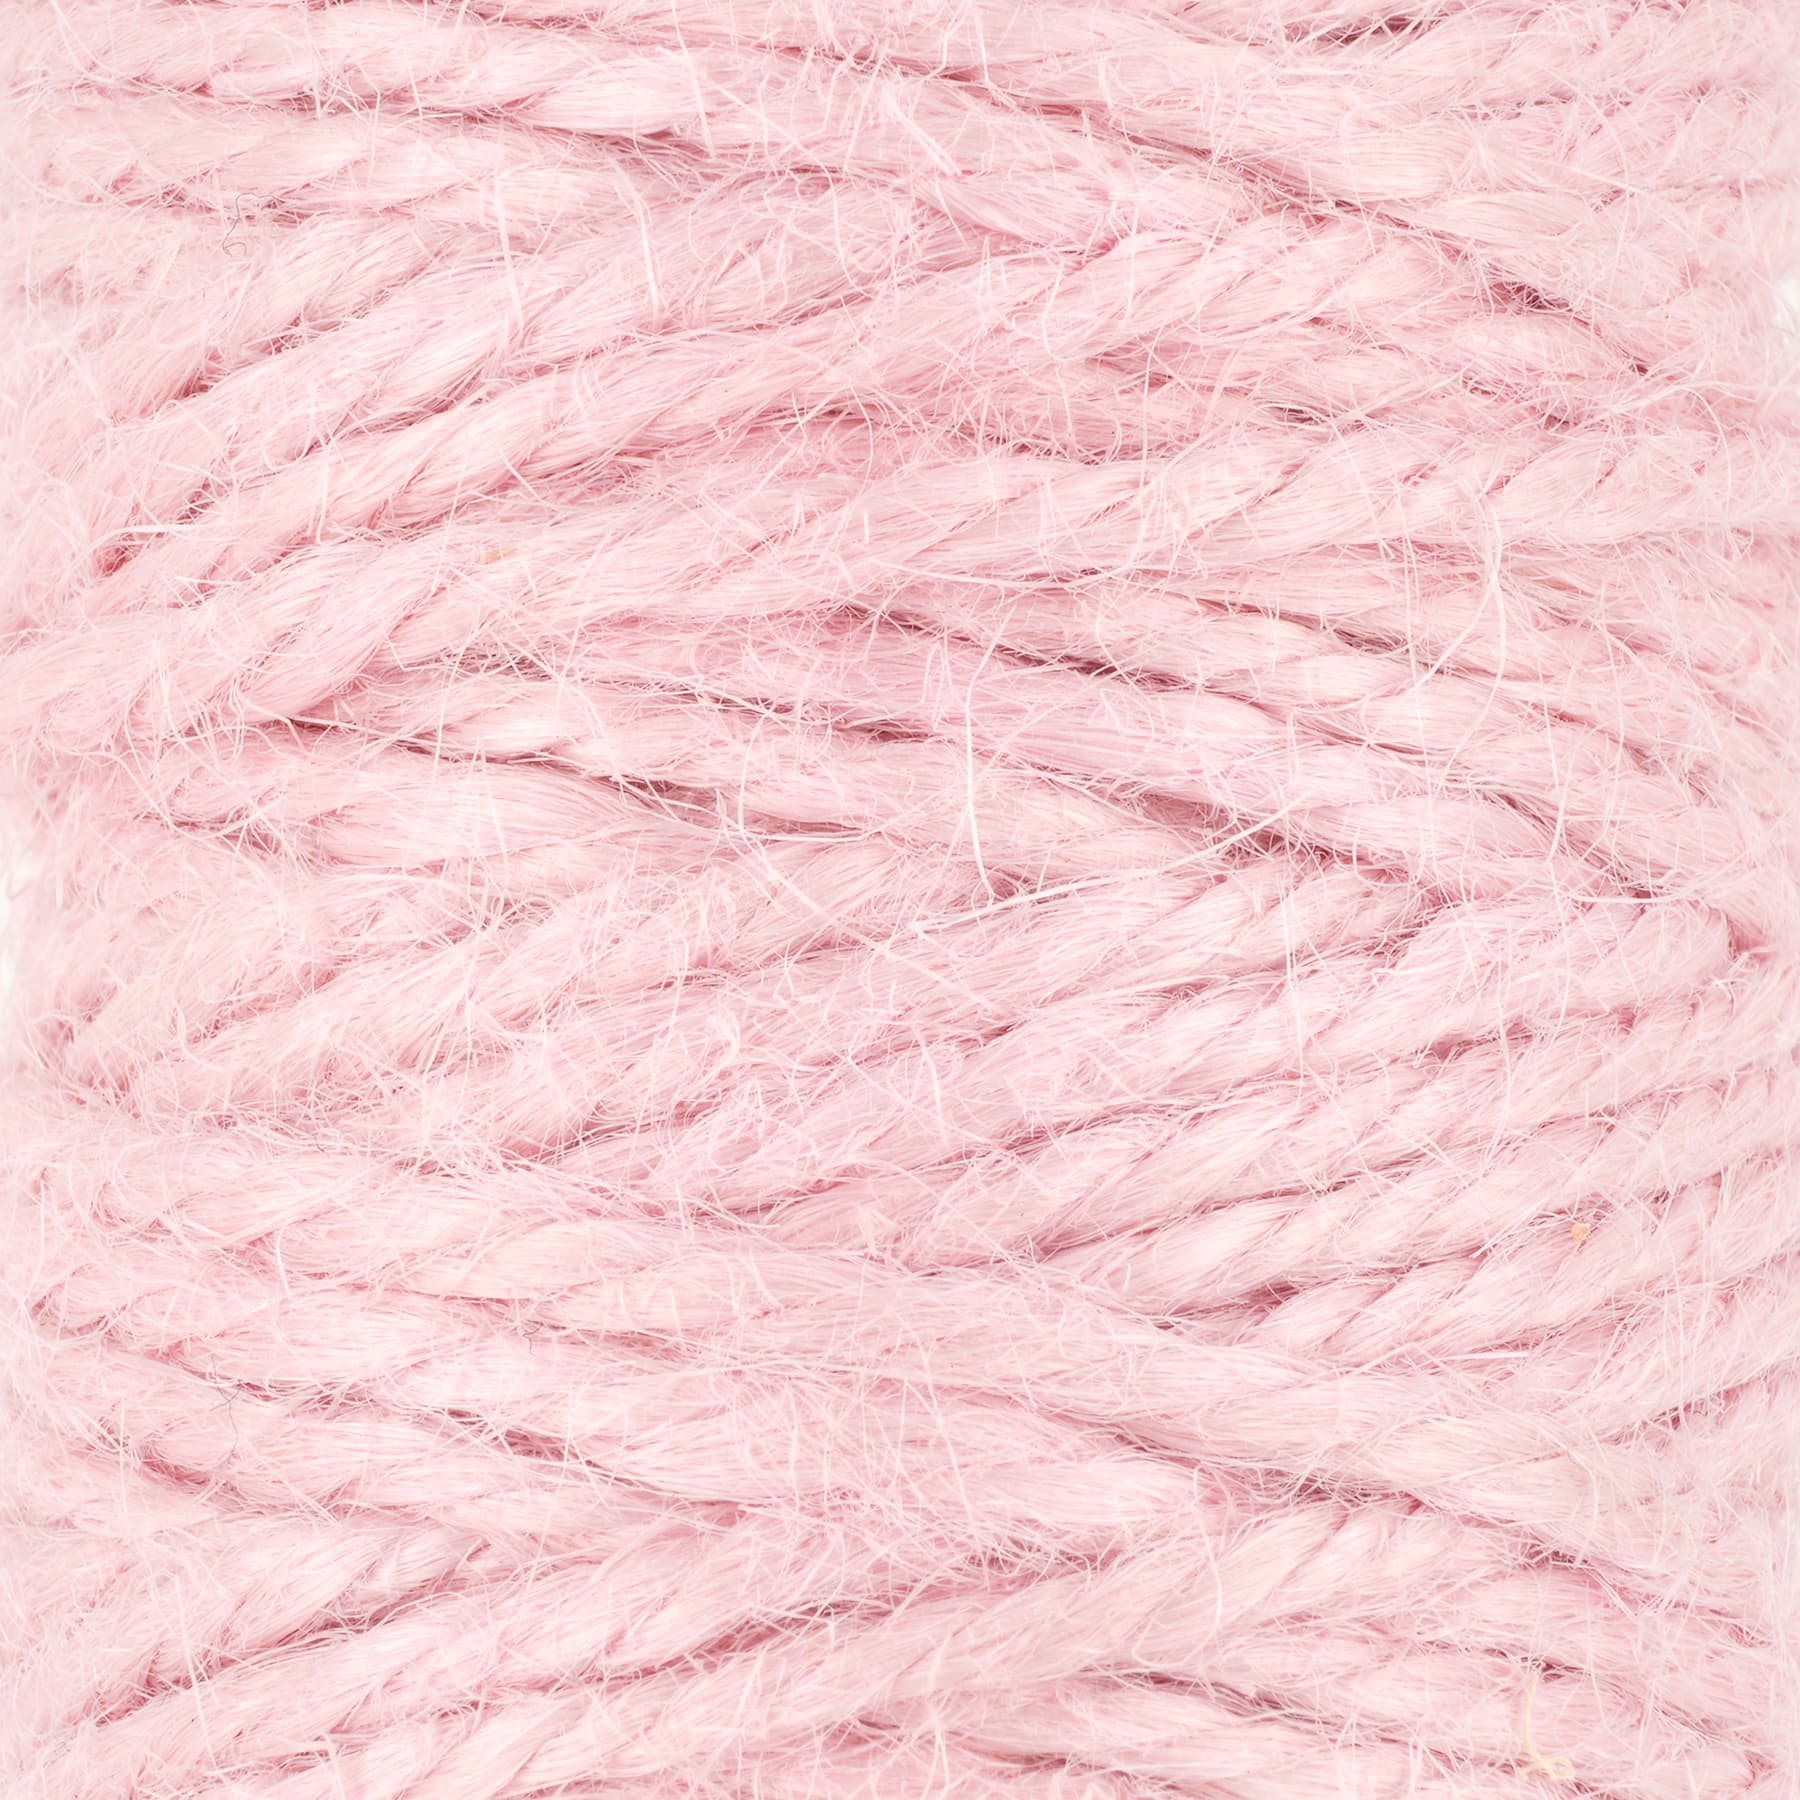 75ft. Pink Twine by Ashland&#xAE;